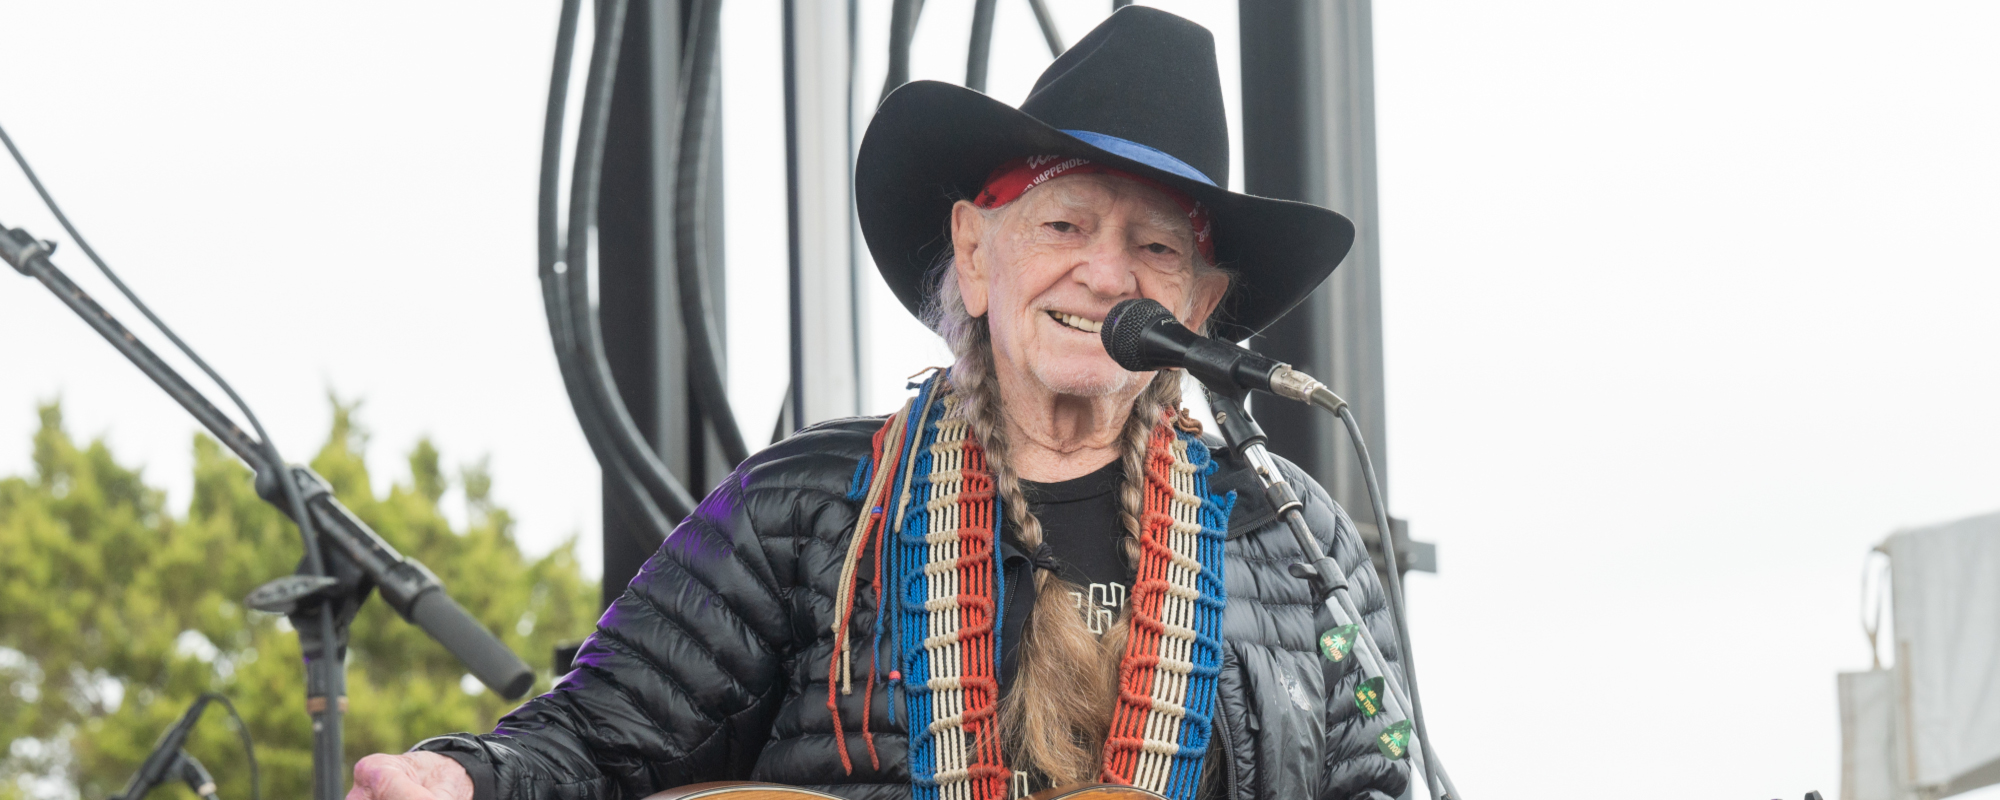 5 Willie Nelson Albums Every Music Fan Should Own